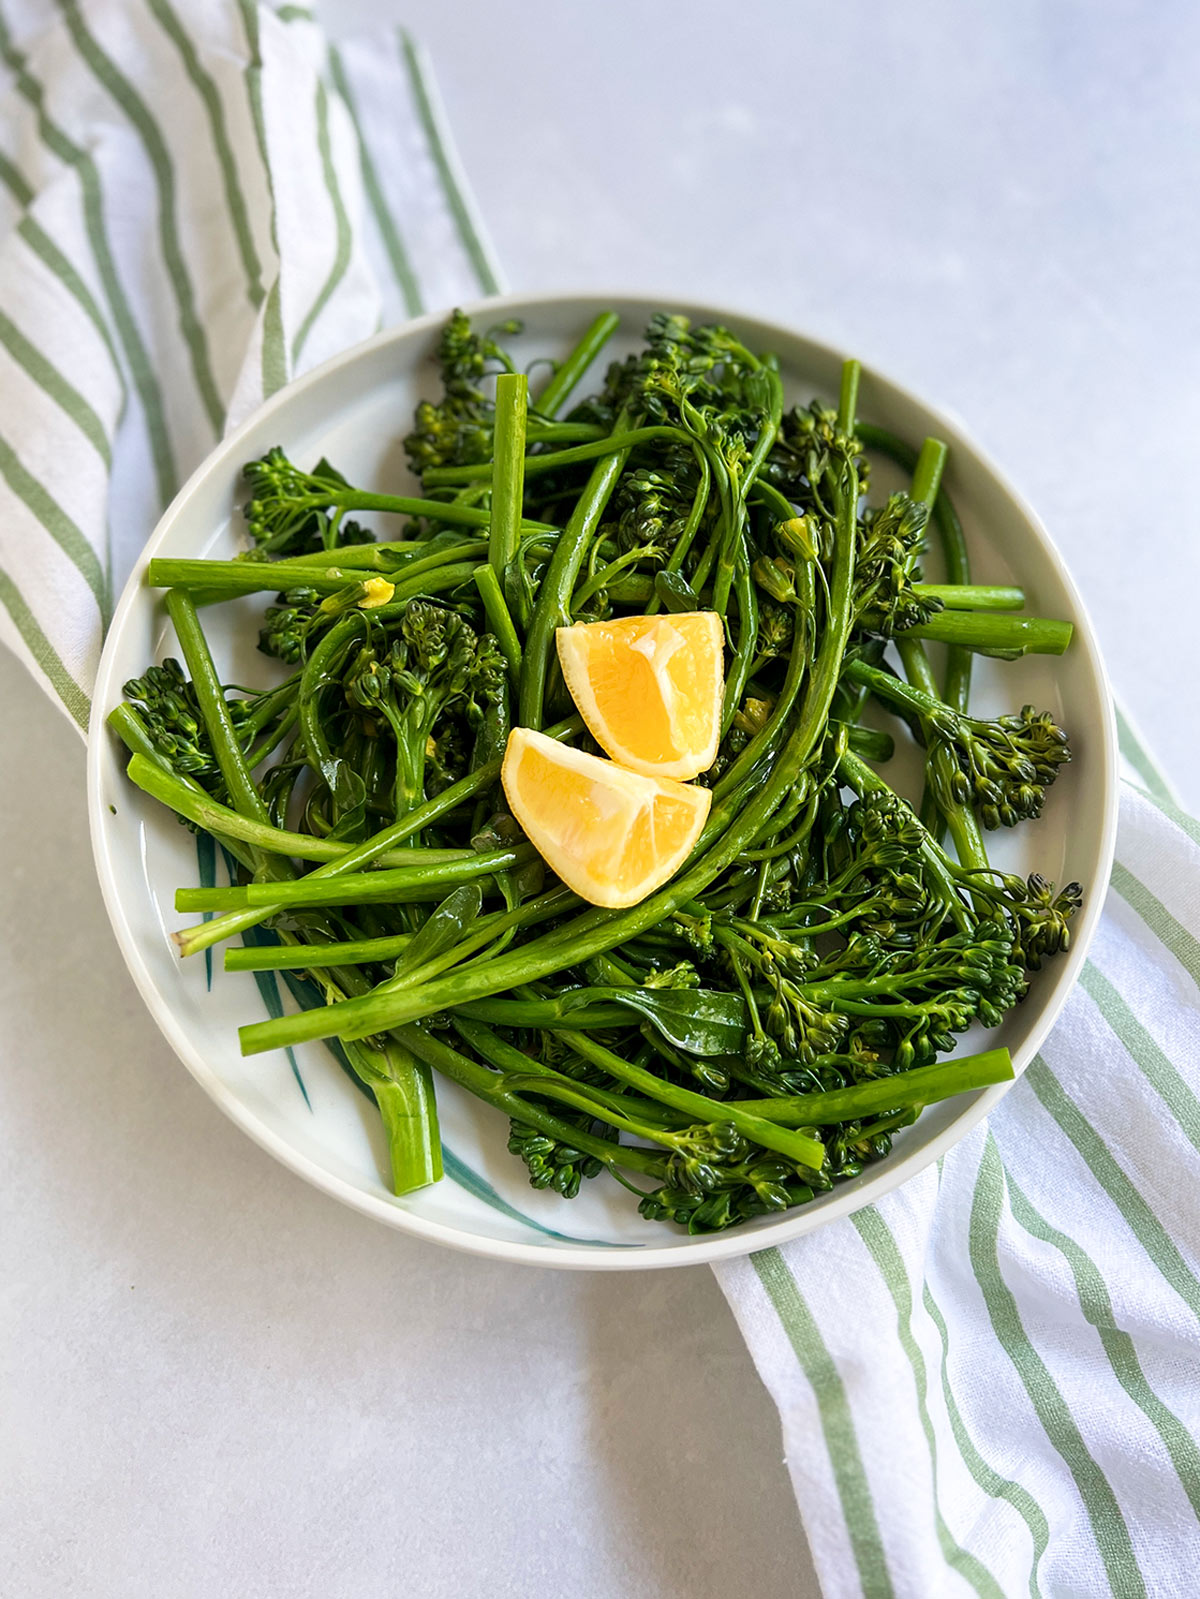 Broccolini on a white plate with a striped napkin underneath and w pieces of lemon on top.